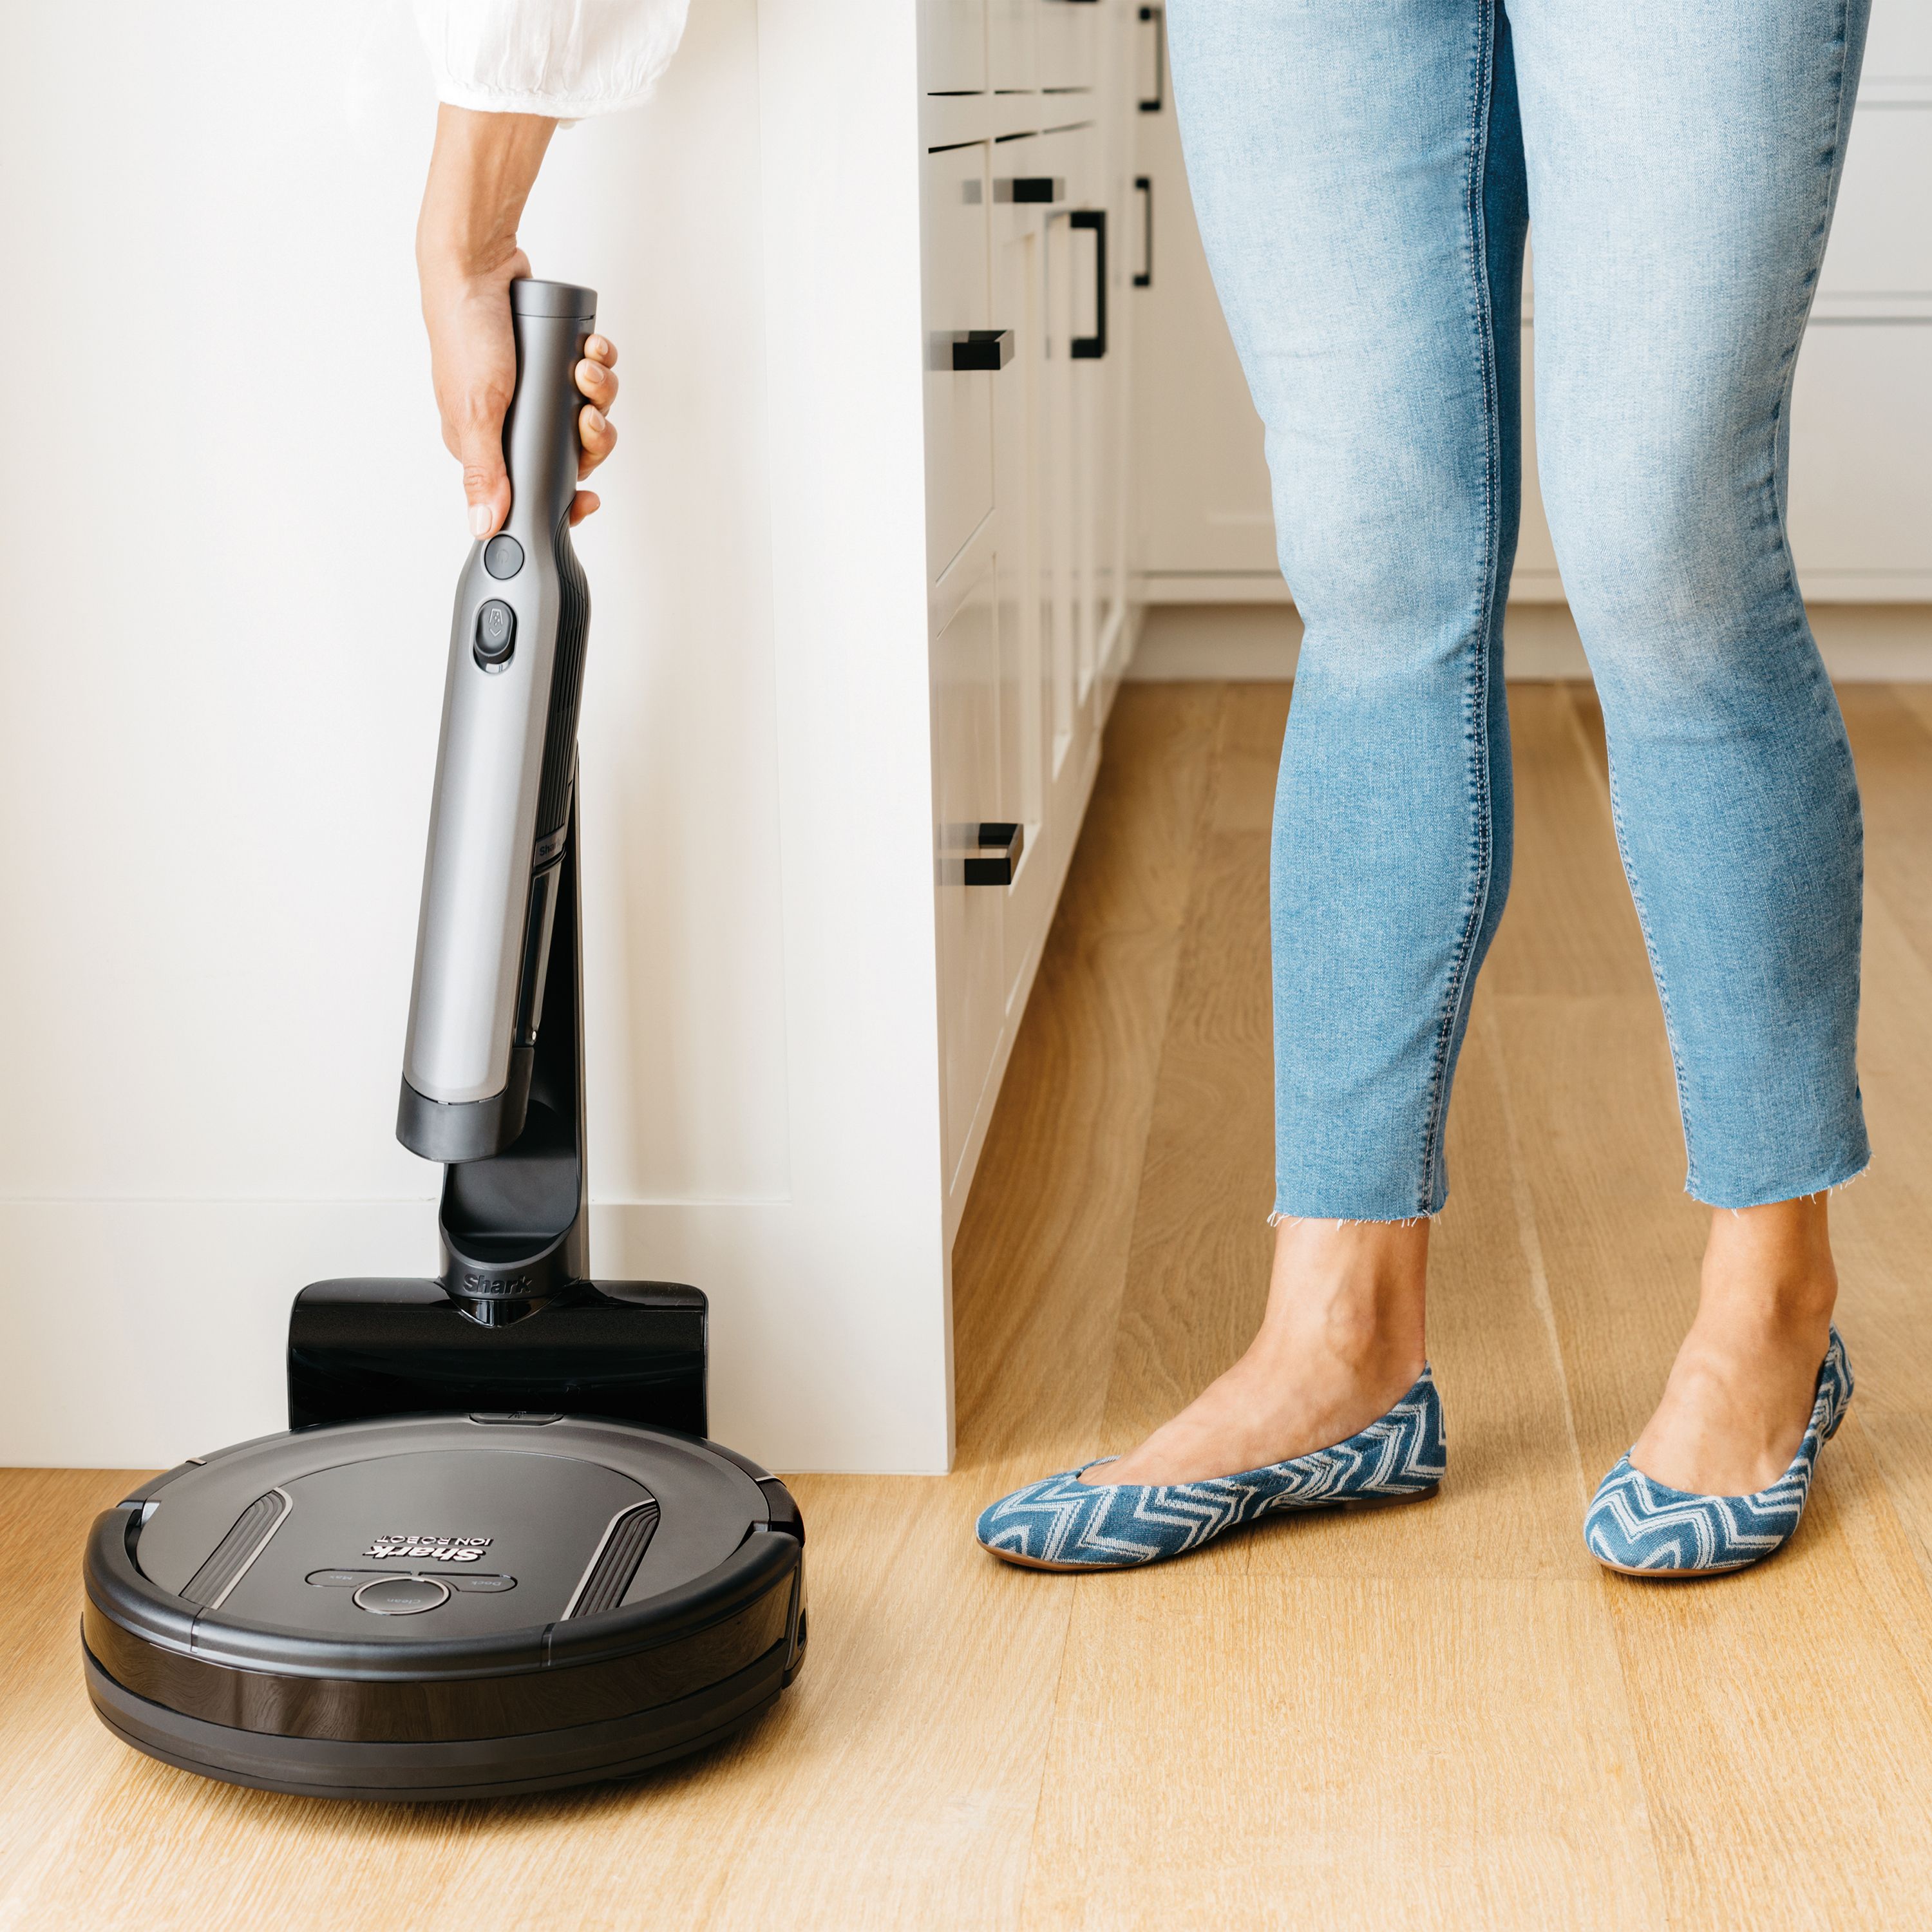 SHARK ION Robot Vacuum Cleaning System with Detachable Hand Vacuum, S86 with Wi-Fi - RV850WV - image 6 of 10